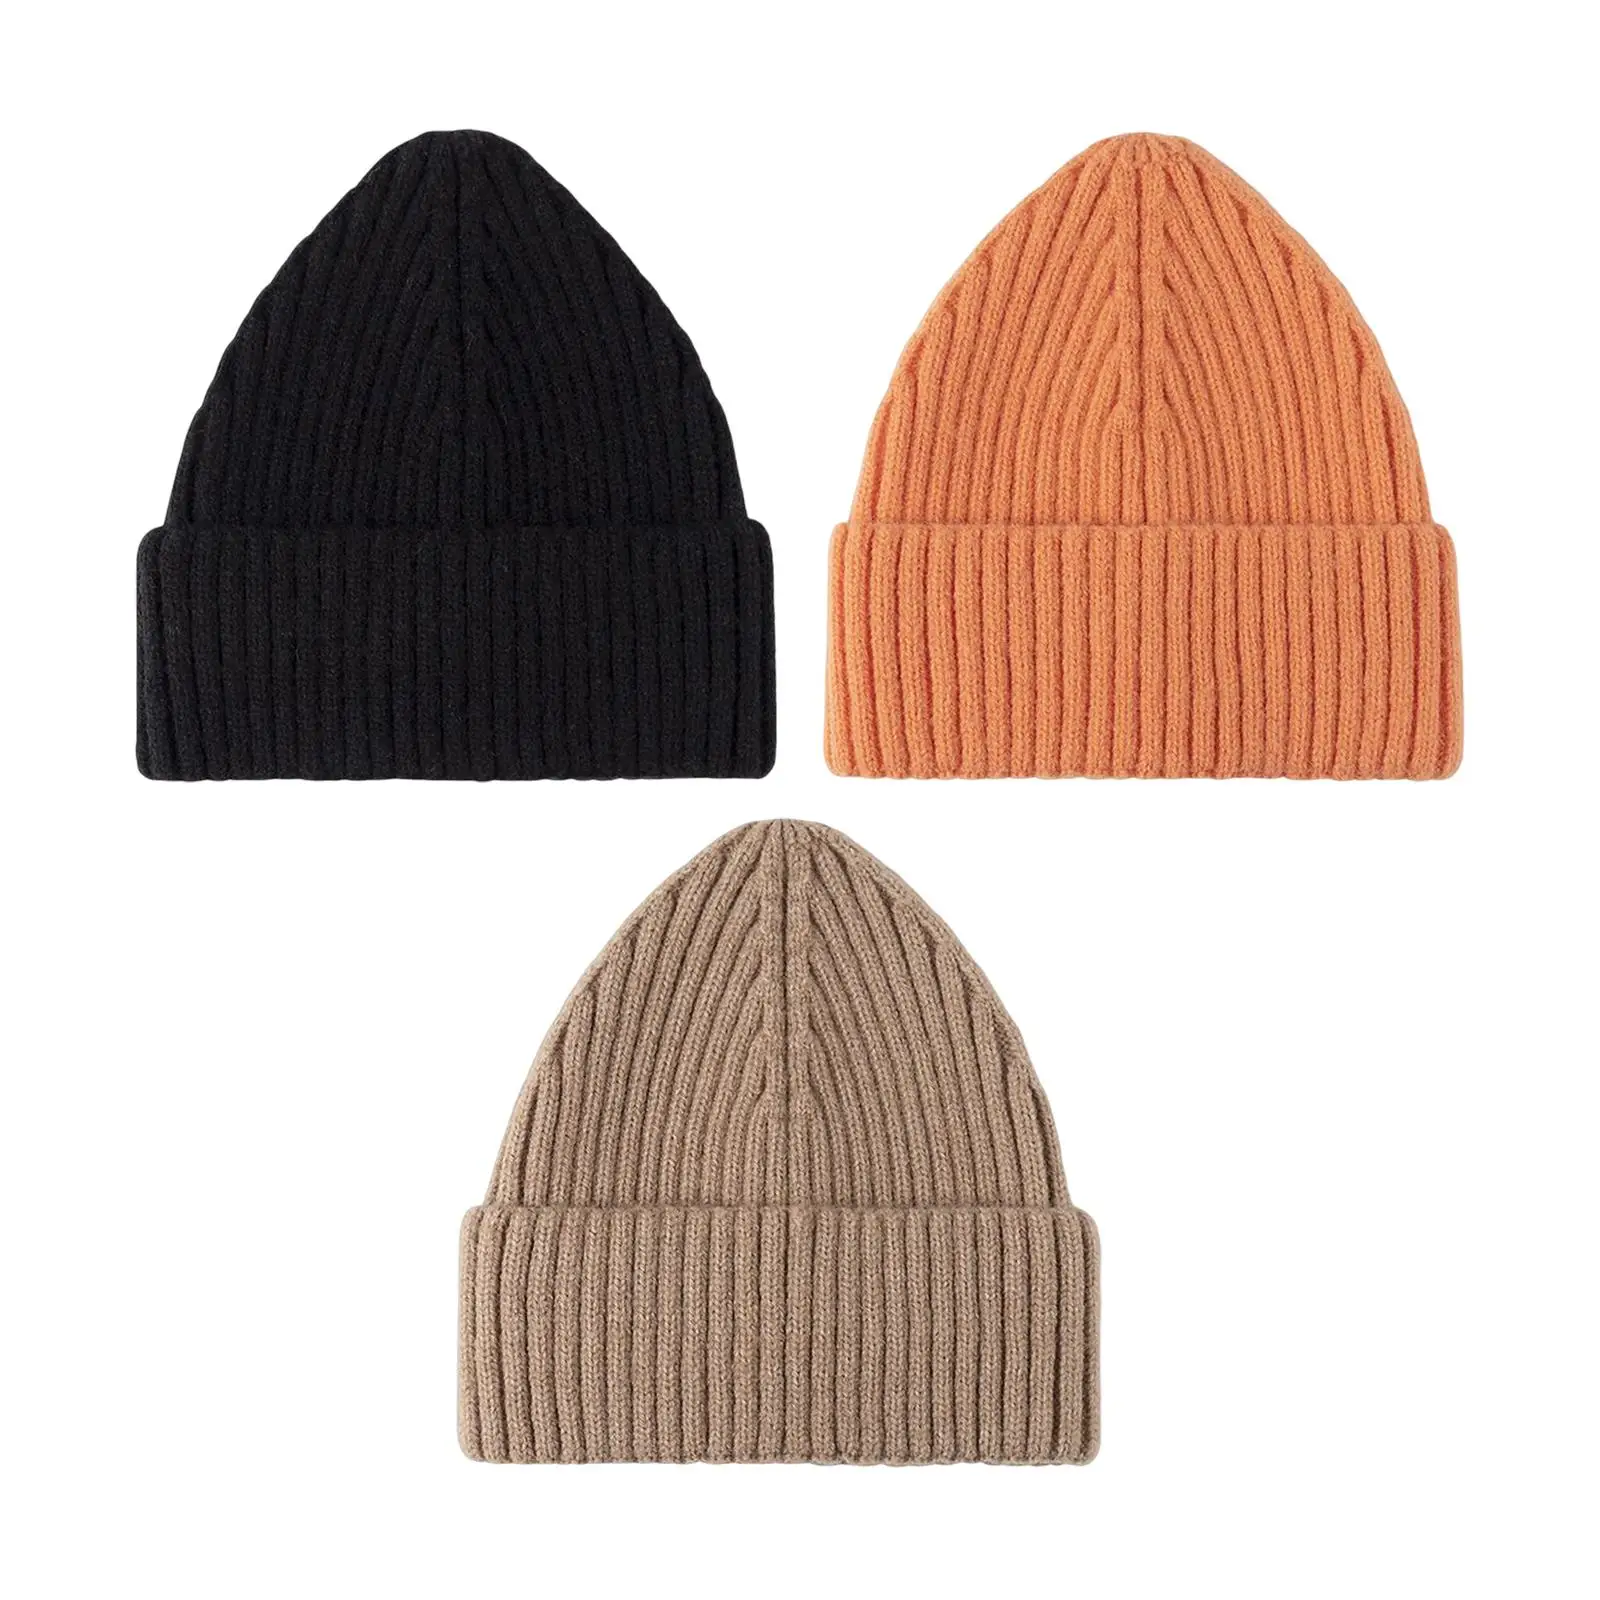 Warm Skull Caps Winter Knit Hat Baseball Hat Fashion Slouchy Soft Clothing for Outdoor Men Women Activities Climbing